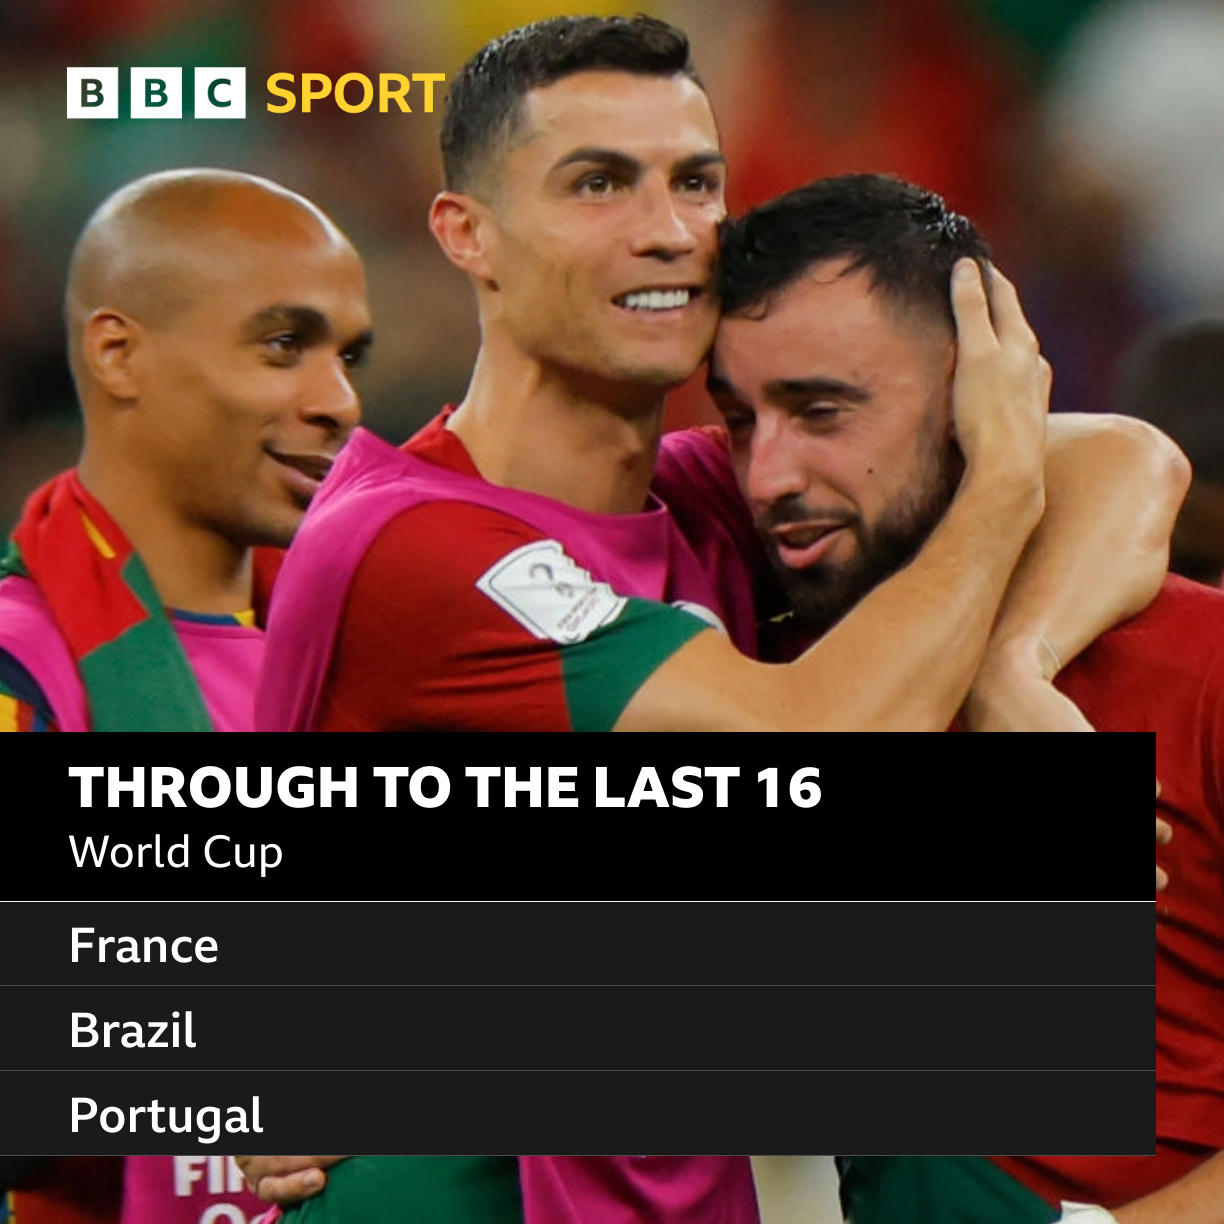 Portugal v Uruguay LIVE Watch 2022 World Cup score, commentary and updates - Live